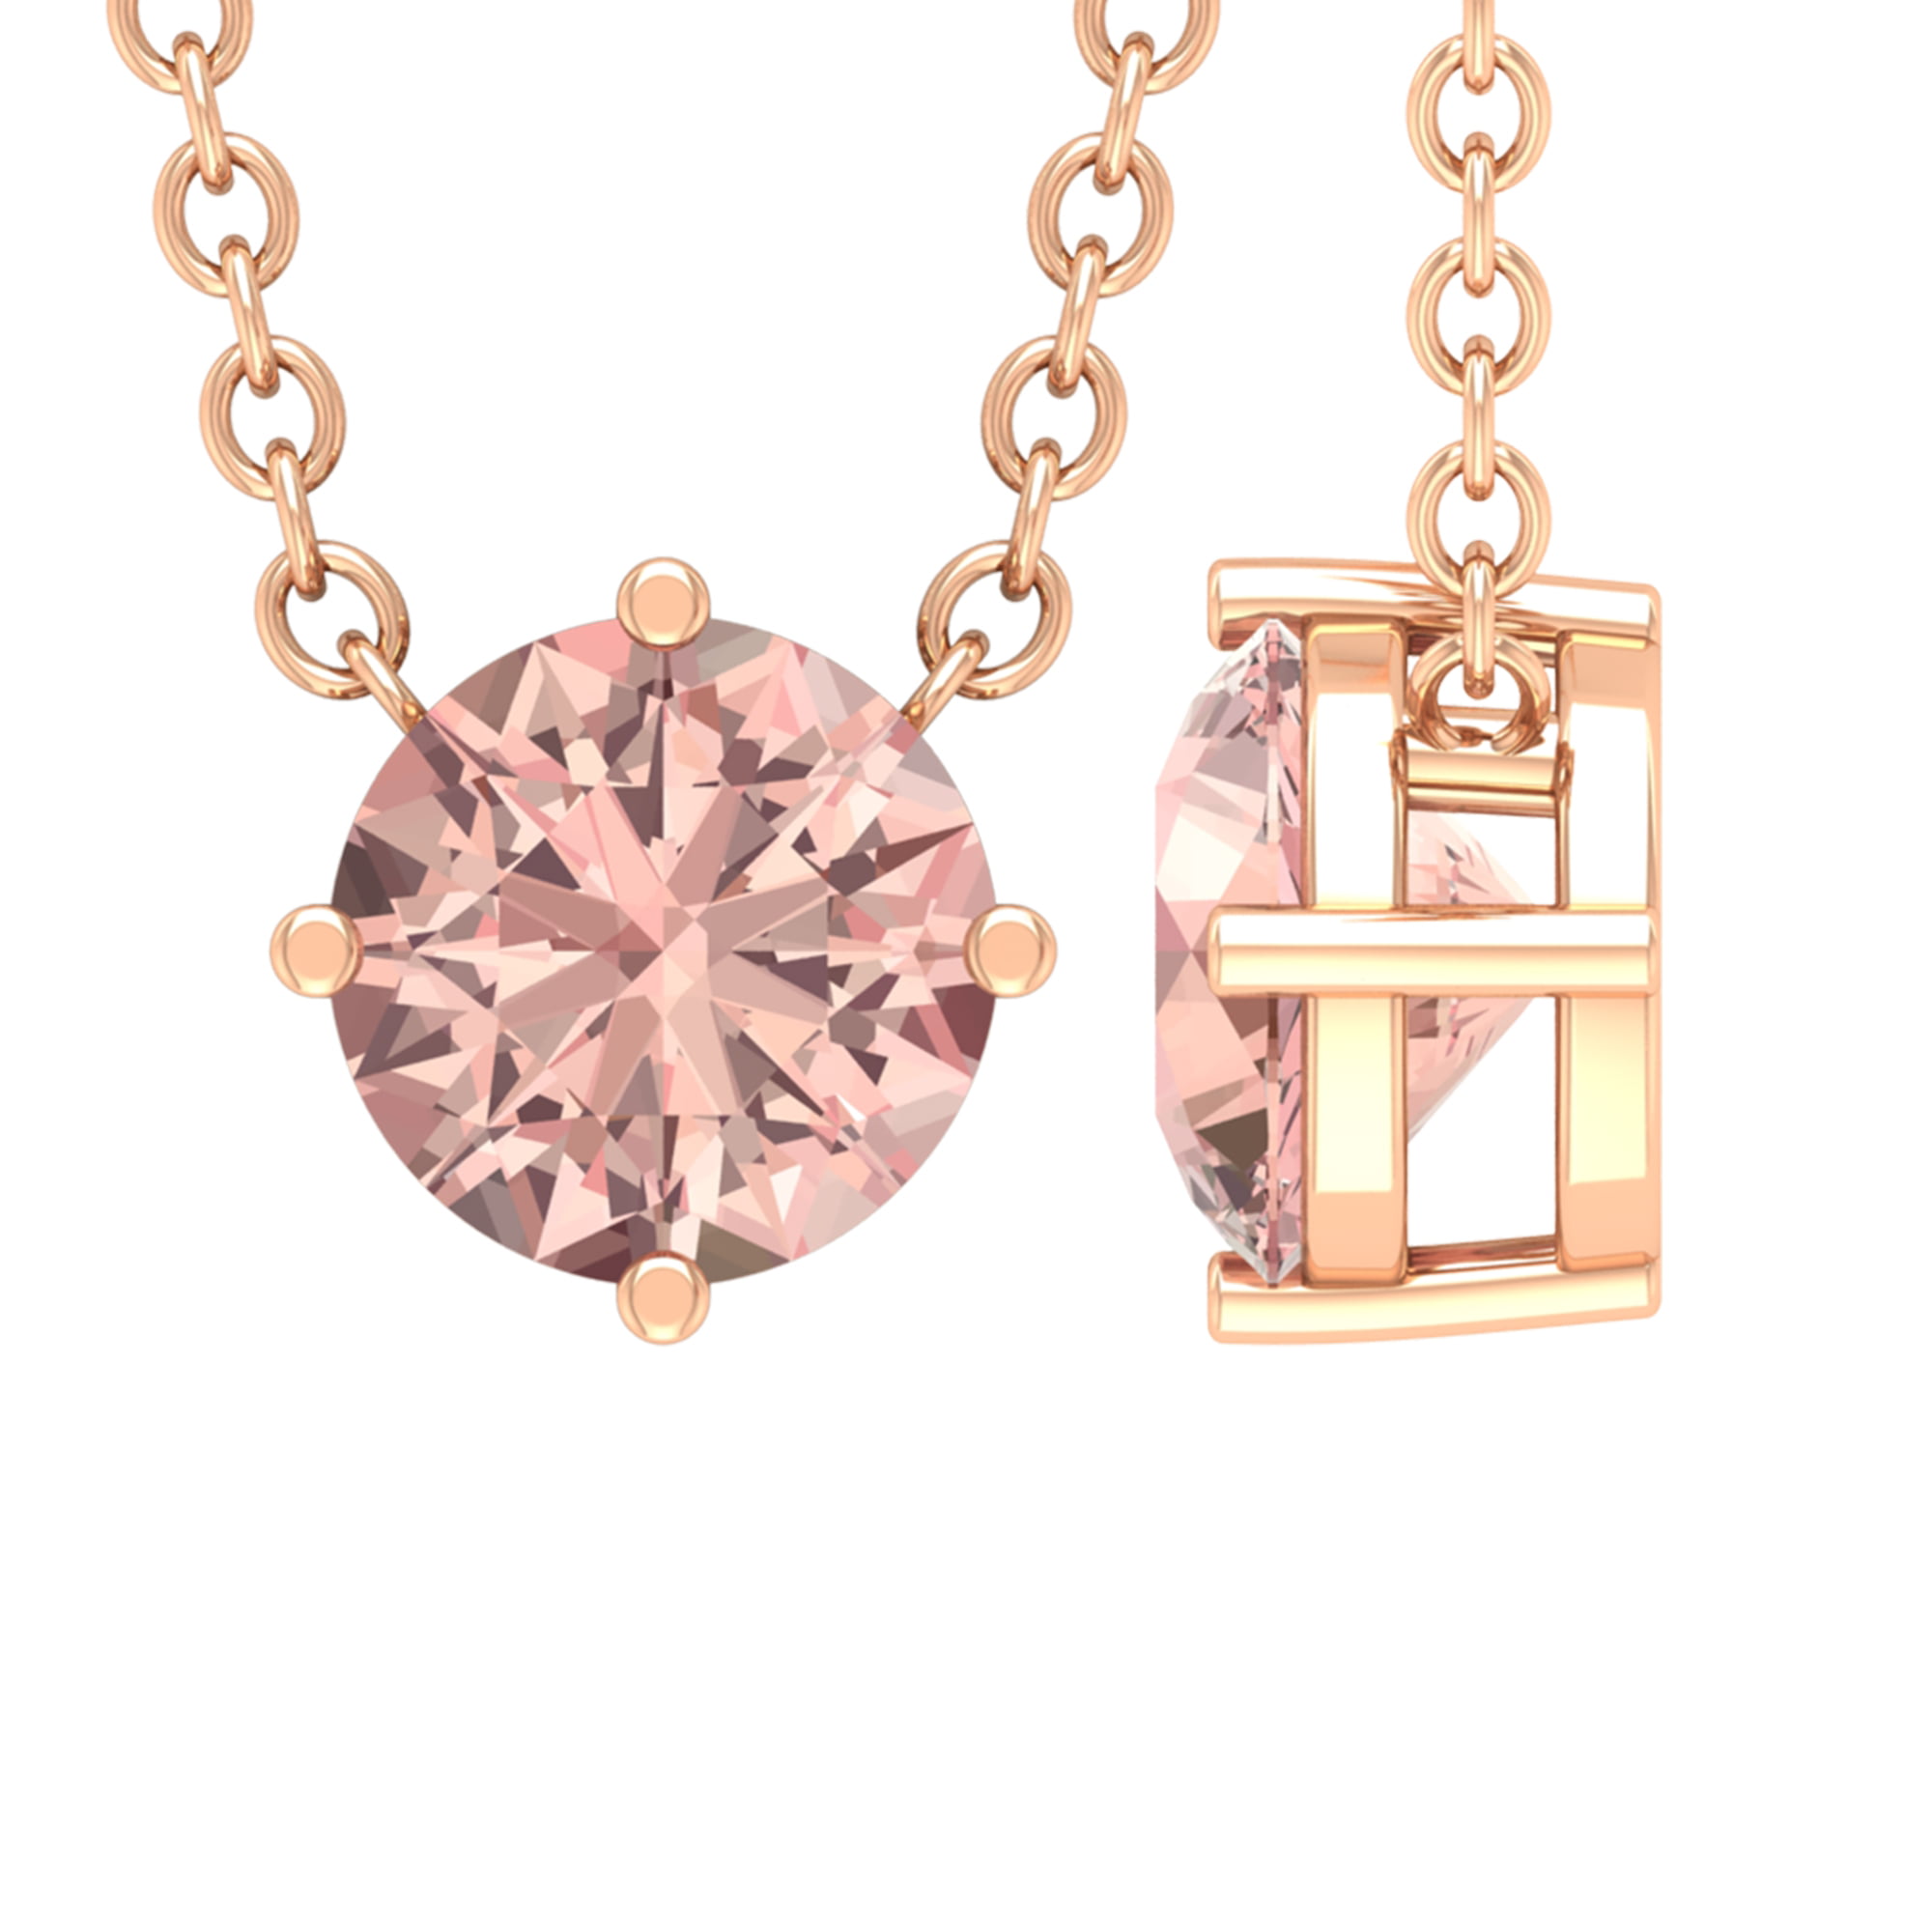 2Ct Round Cut Morganite Solitaire Pendant Solid 14K Rose Gold Finish Free Chain